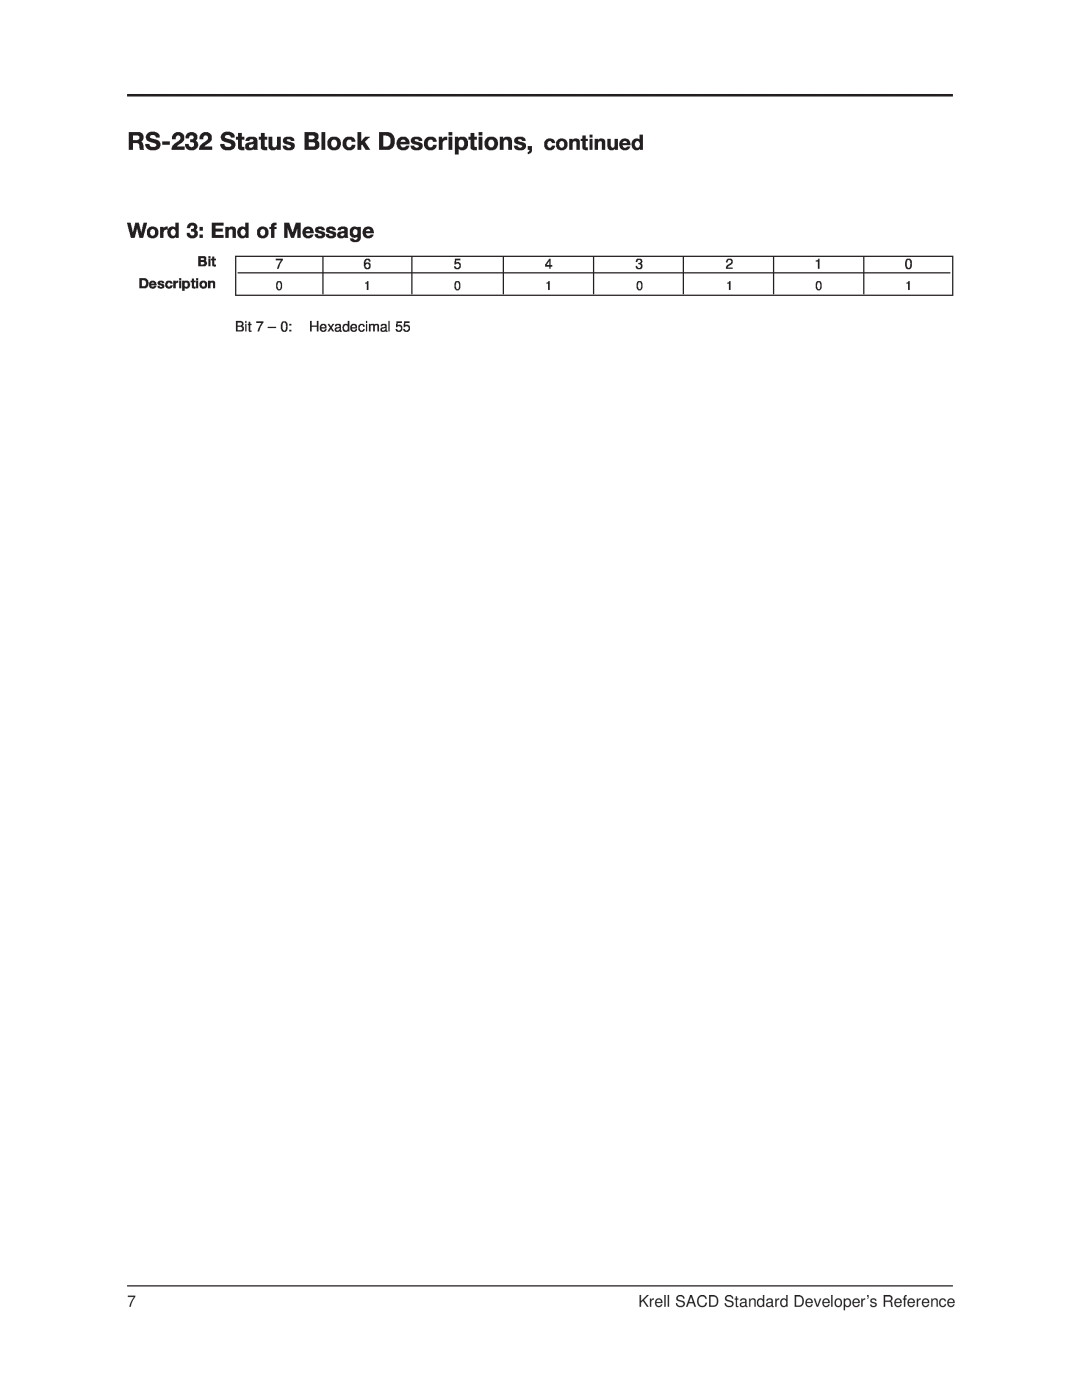 Krell Industries manual Word 3 End of Message, RS-232Status Block Descriptions, continued 